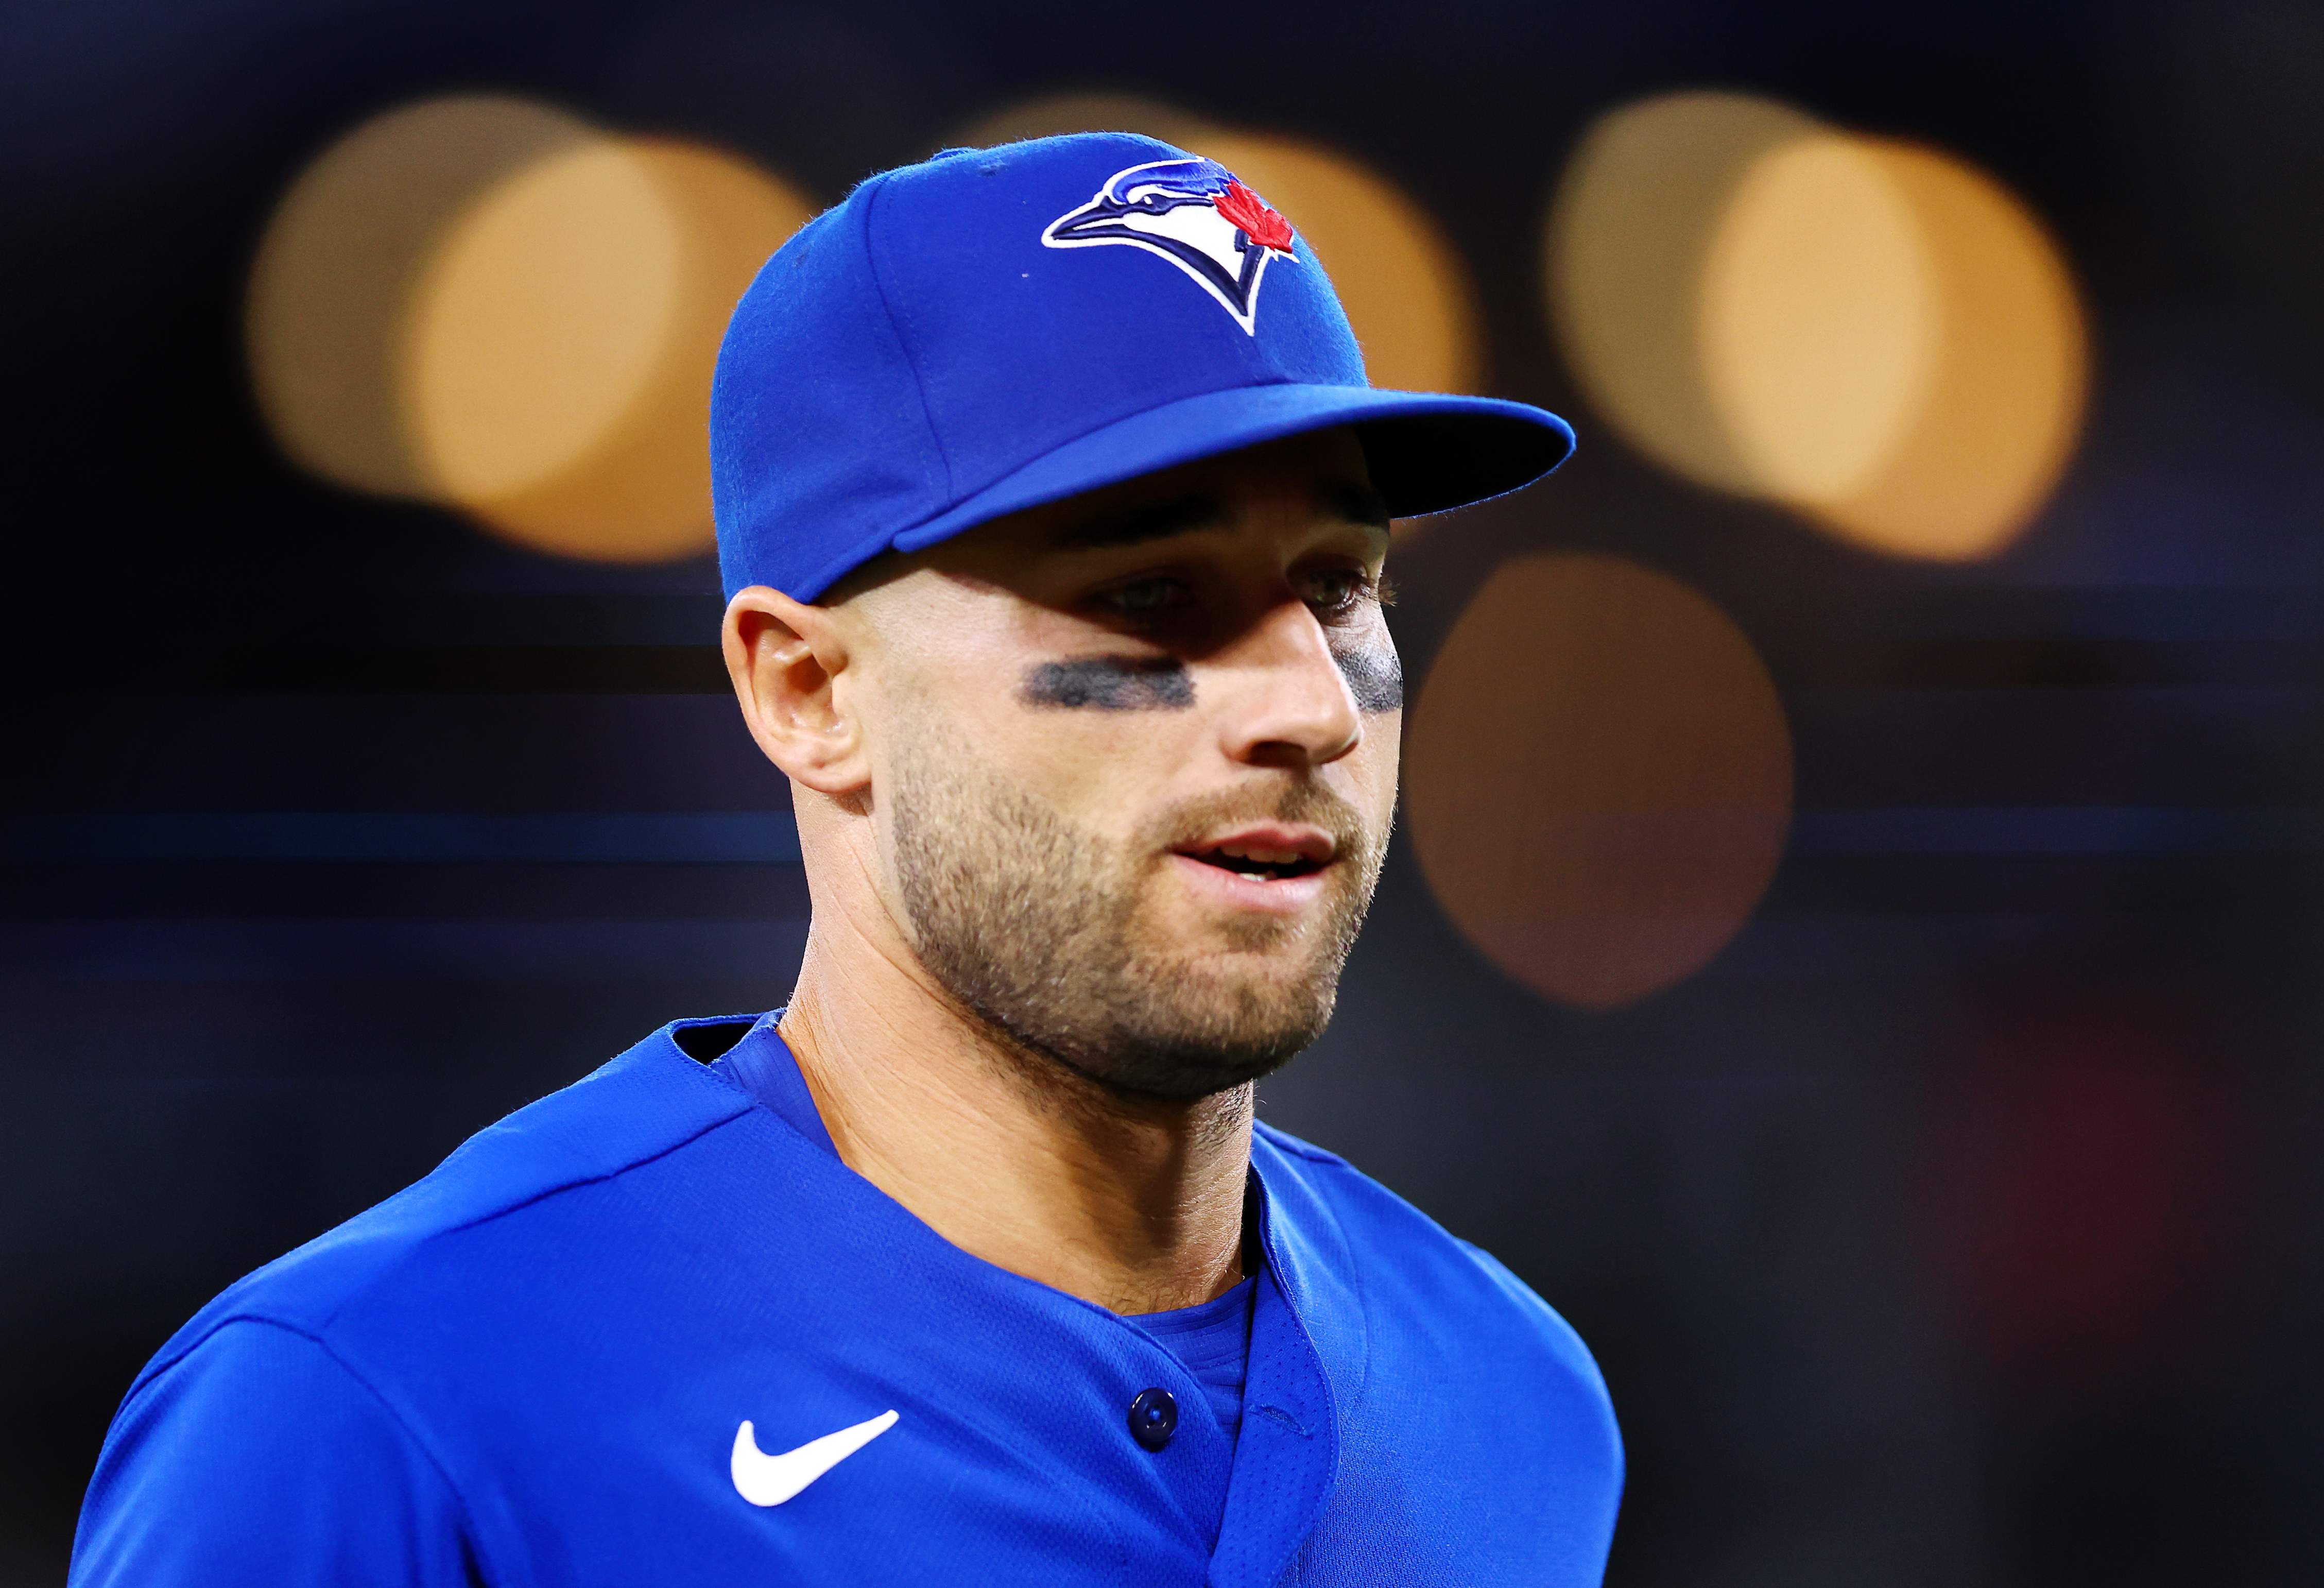 Kevin Kiermaier respected Jays while with division rival Rays